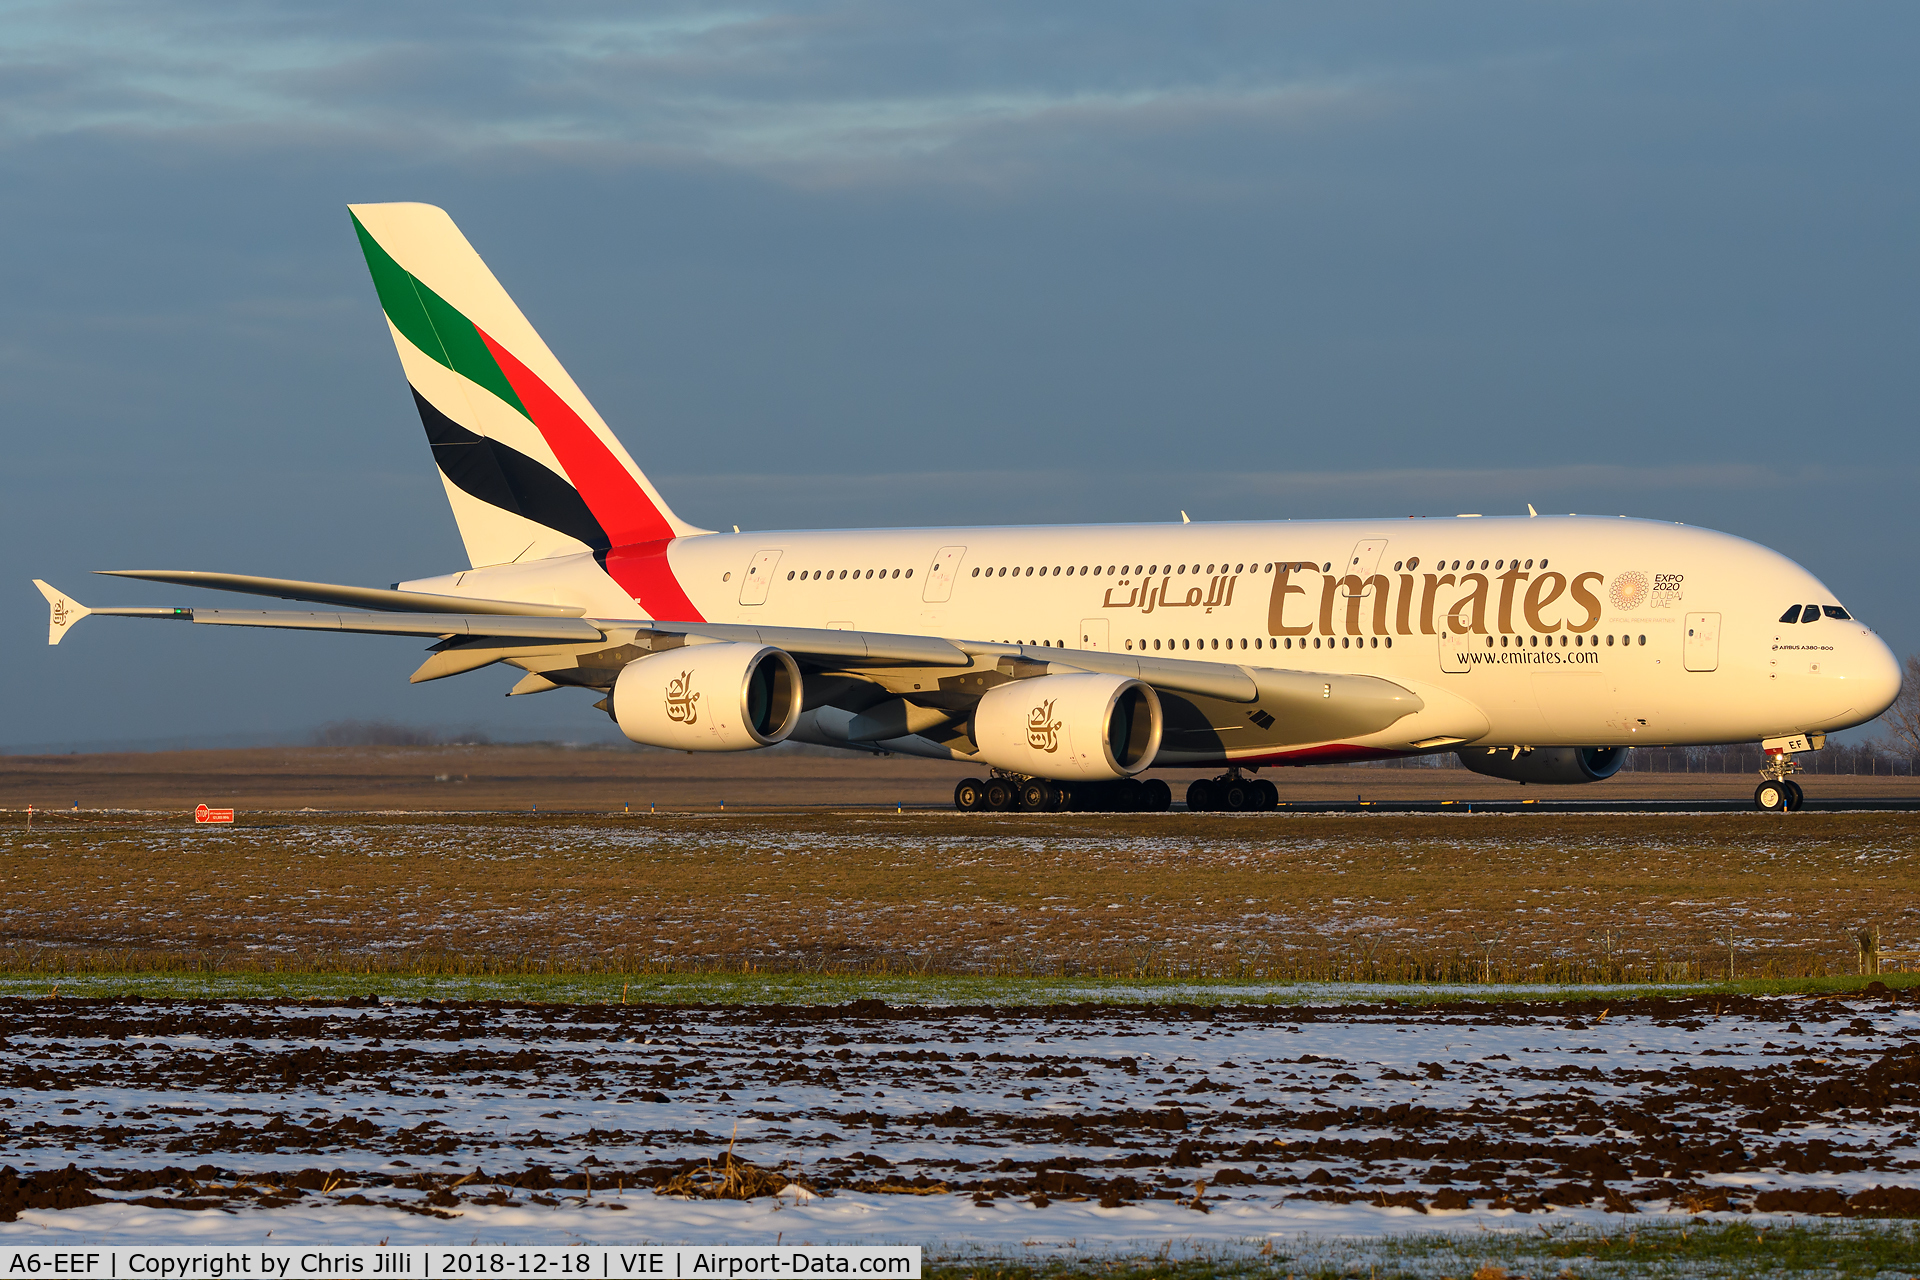 A6-EEF, 2012 Airbus A380-861 C/N 113, Emirates